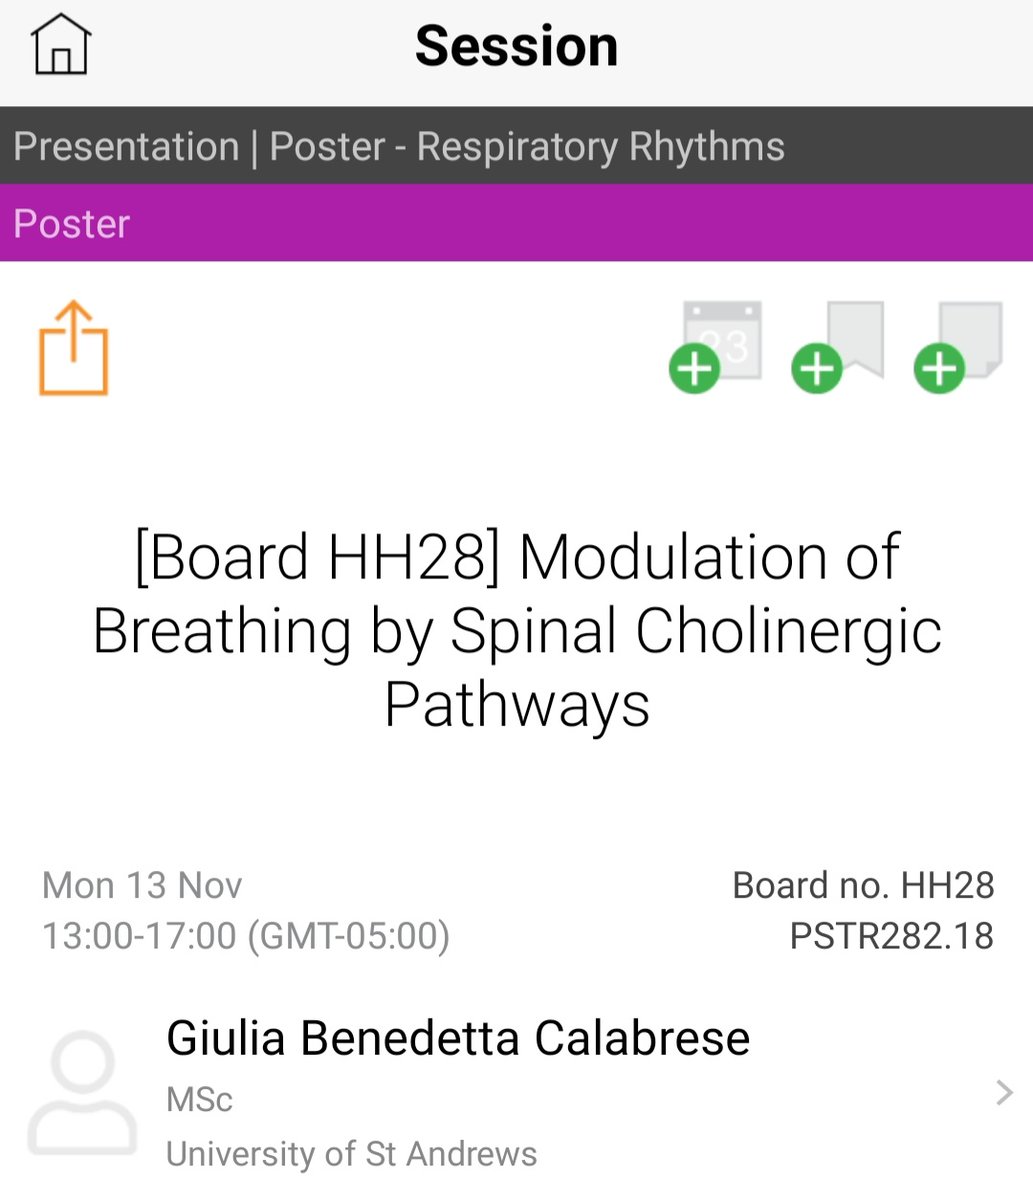 Now that your jetlag is over, come check out my poster on #cholinergic #modulation of #breathing at board HH28 on Monday afternoon! 🧠🫁 @SfNtweets #Neuroscience2023